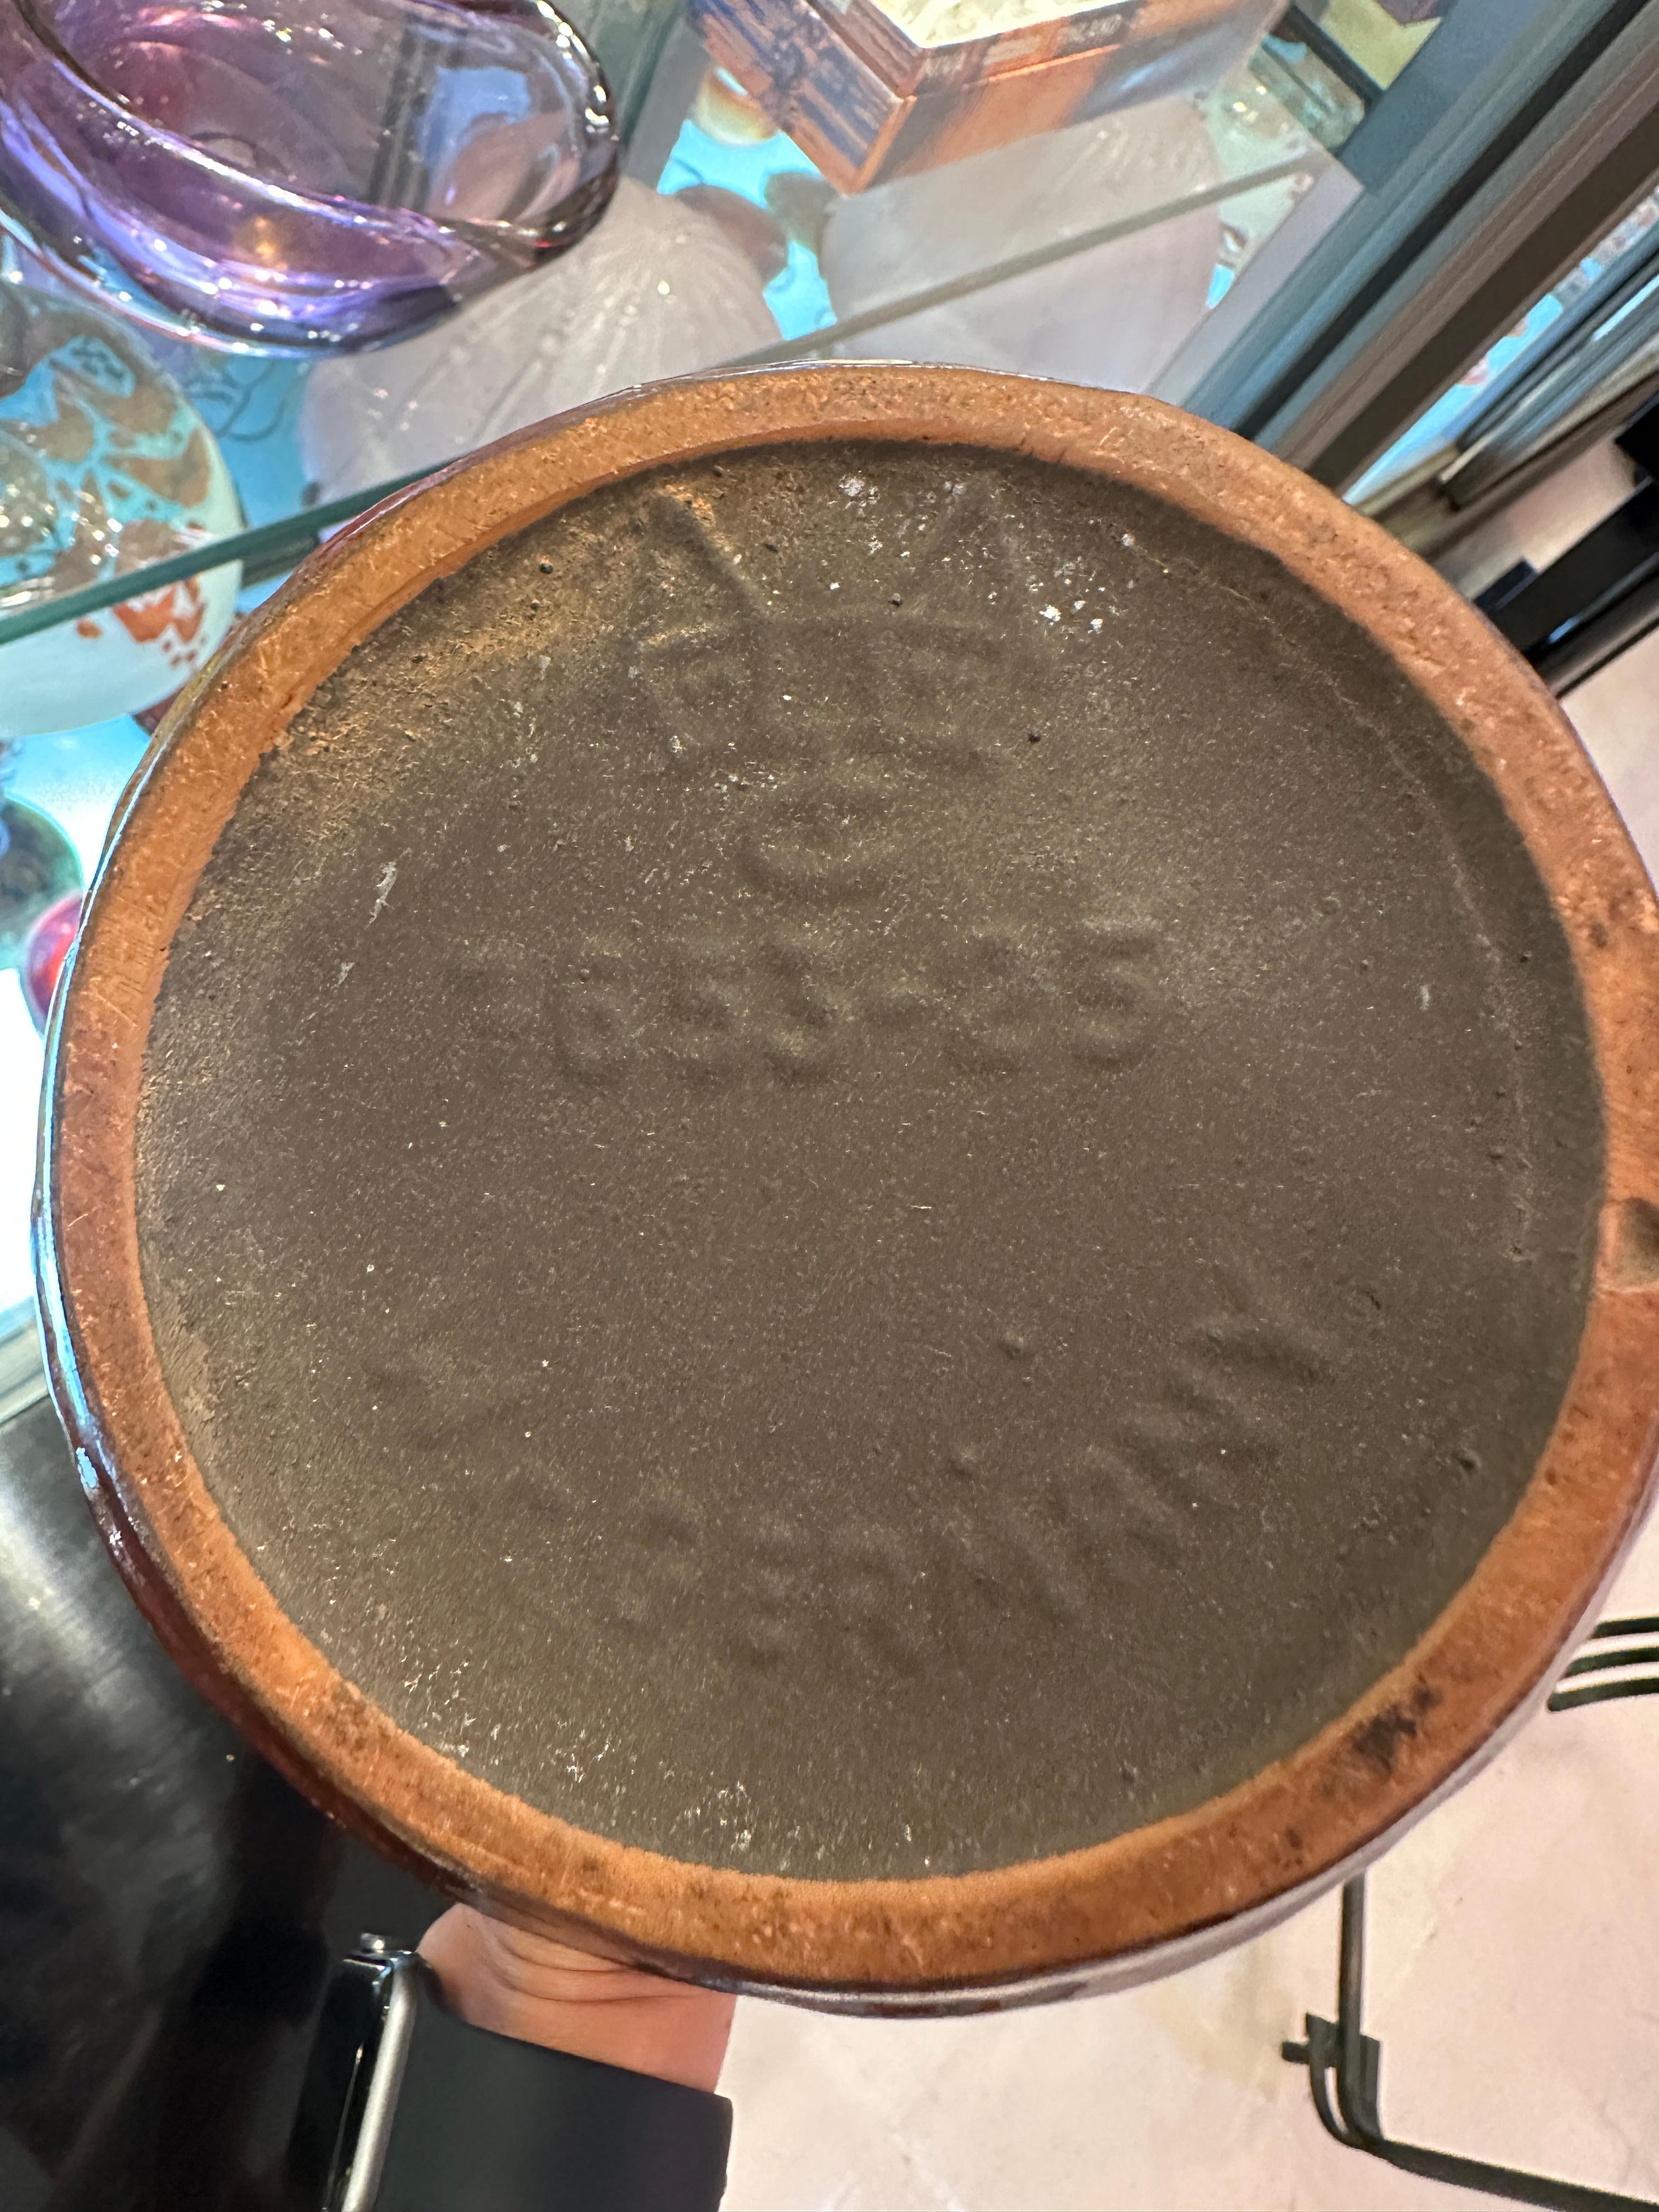 Ceramic
Sign: W. Germany 7653-25
We have specialized in the sale of Art Deco and Art Nouveau and Vintage styles since 1982. If you have any questions we are at your disposal.
Pushing the button that reads 'View All From Seller'. And you can see more